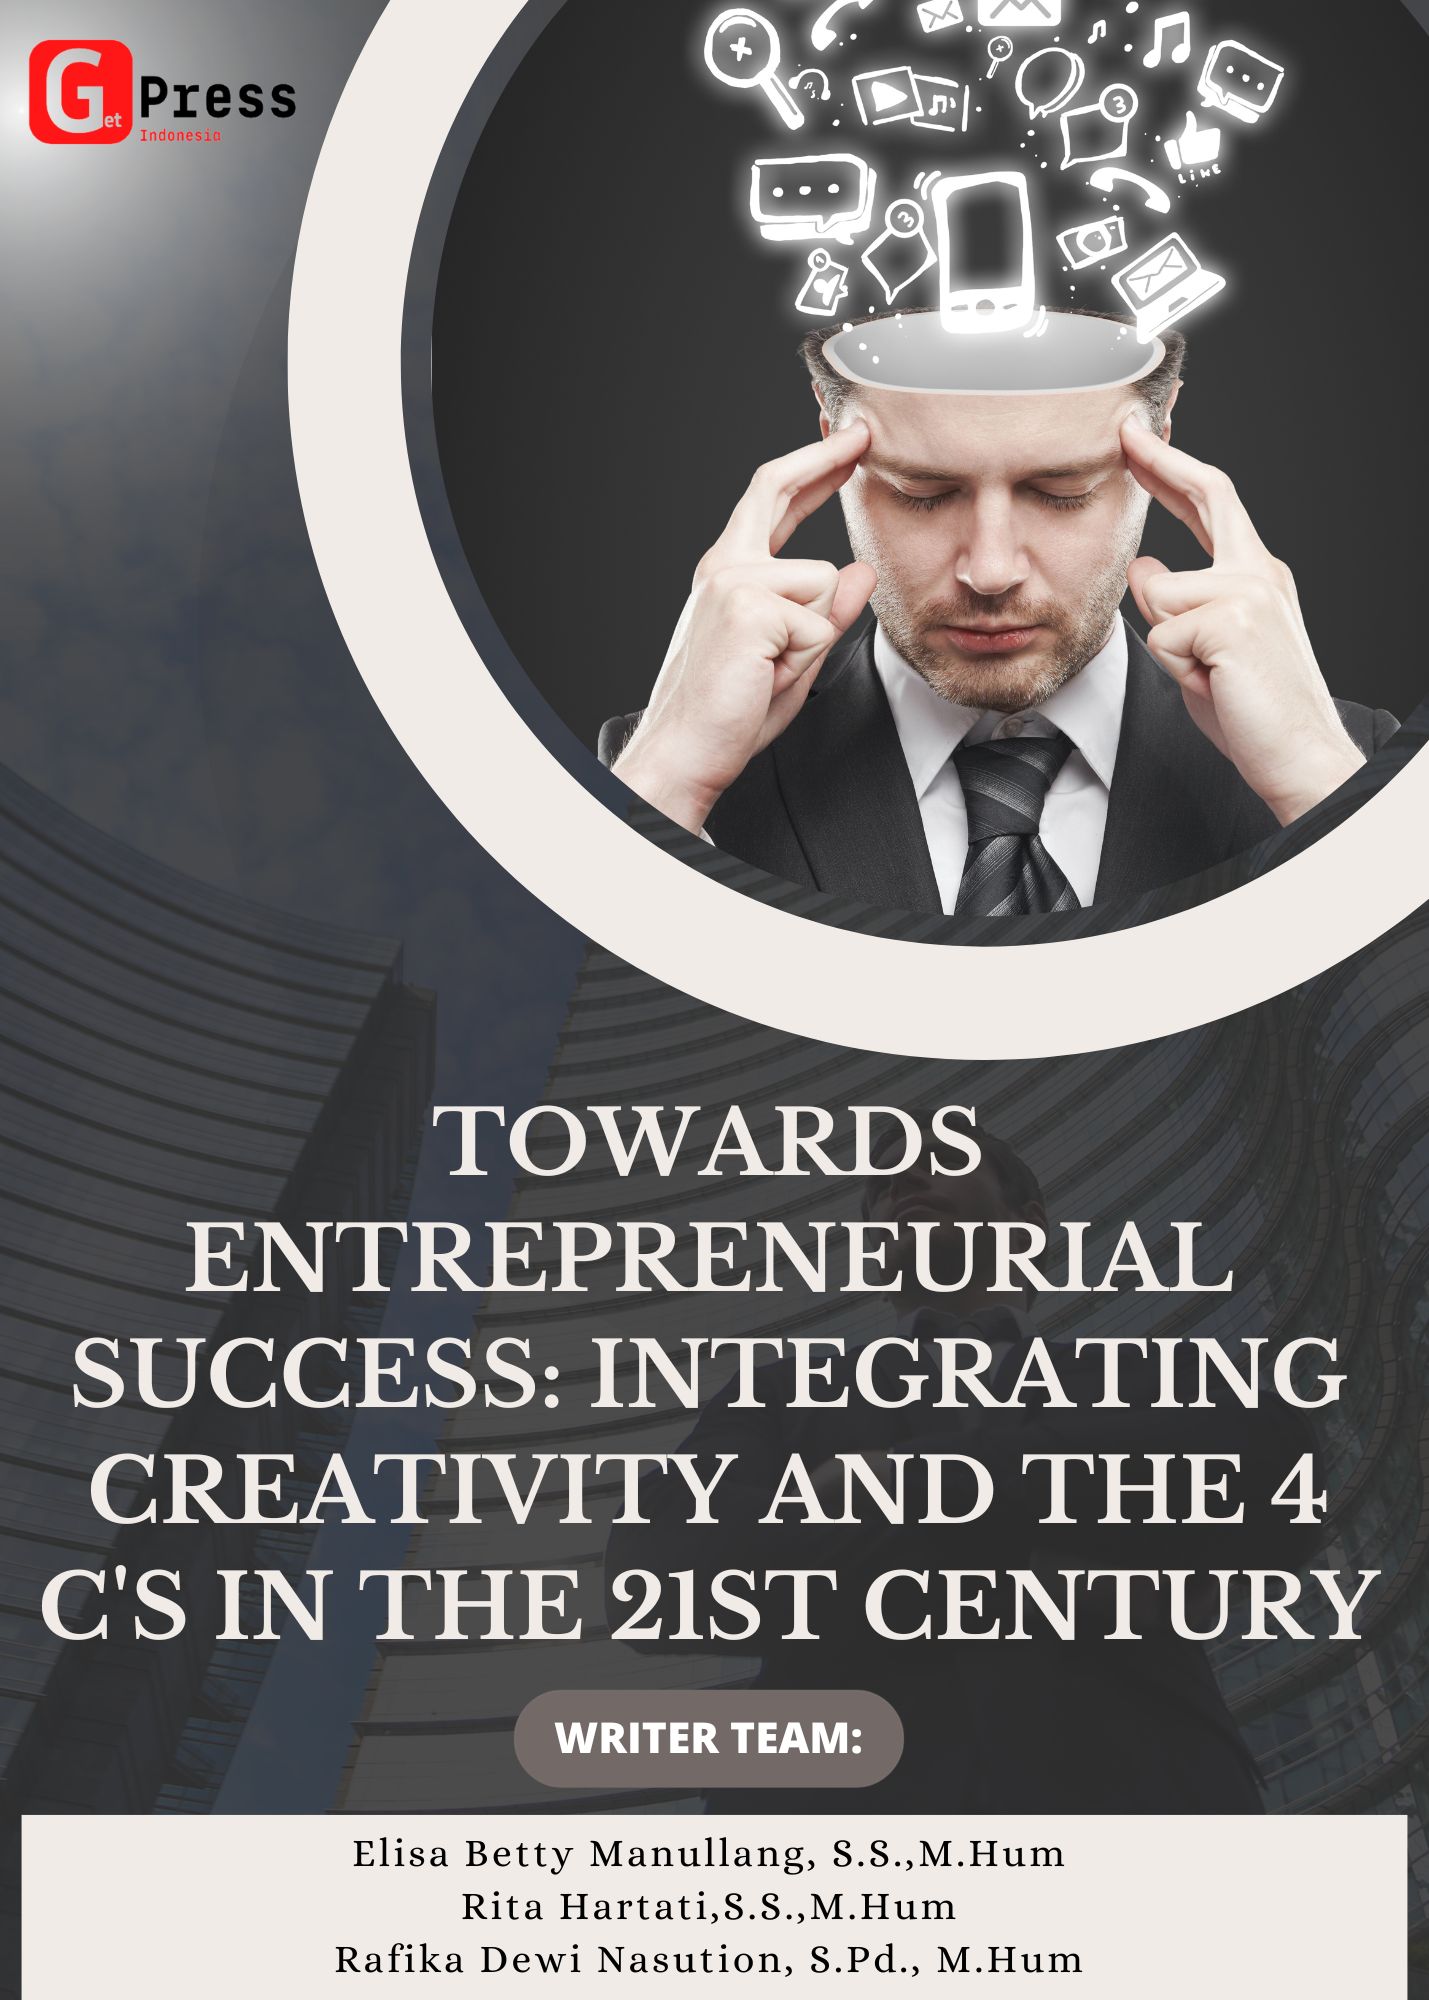 Towards Entrepreneurial Success: Integrating Creativity and the 4 C's in the 21st Century